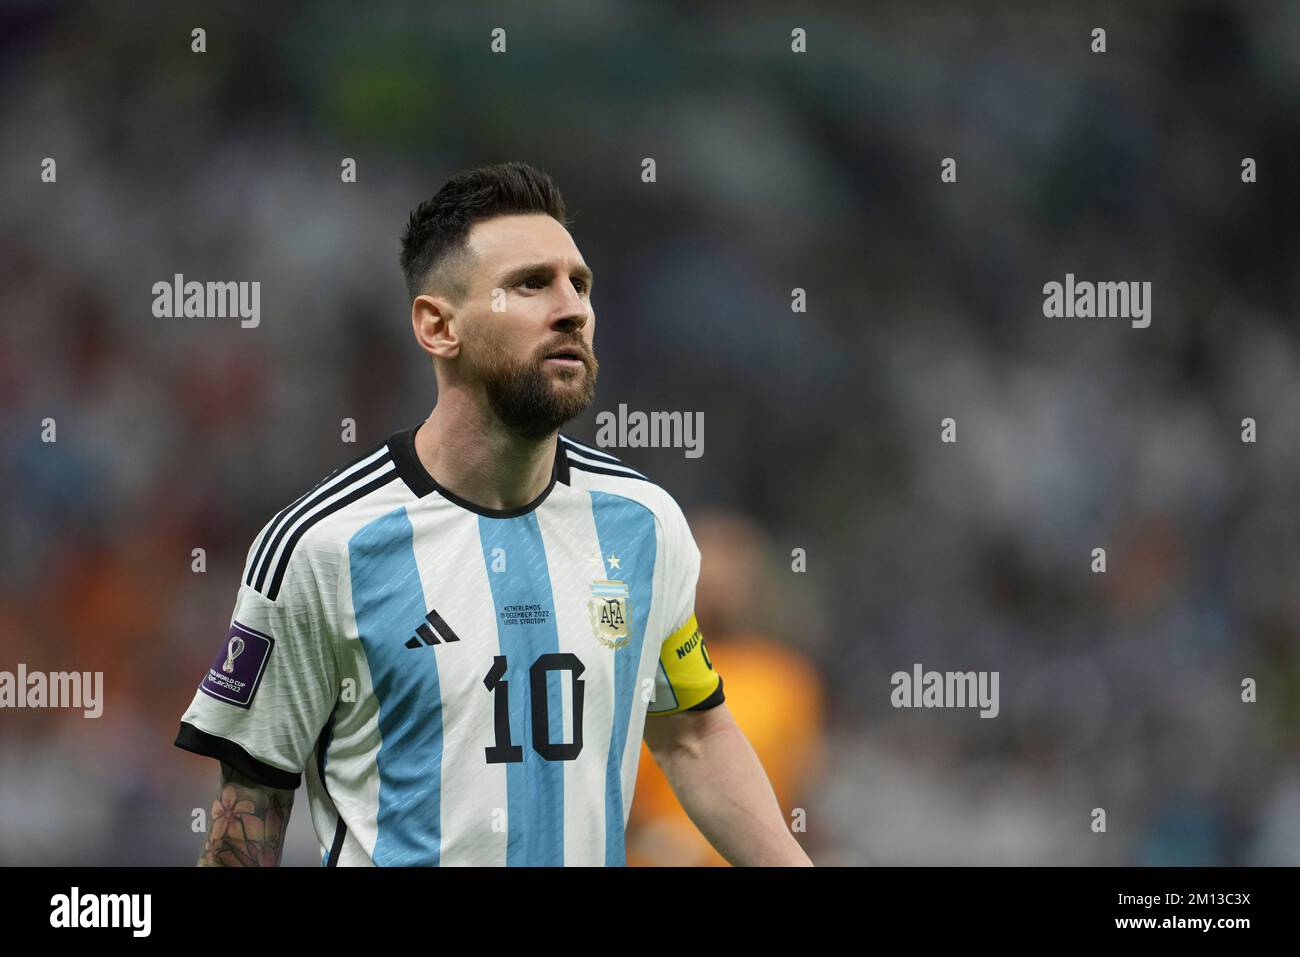 Lusail, Qatar. 9th Dec, 2022. Lionel Messi of Argentina looks on during the Quarterfinal between the Netherlands and Argentina of the 2022 FIFA World Cup at Lusail Stadium in Lusail, Qatar, Dec. 9, 2022. Credit: Zheng Huansong/Xinhua/Alamy Live News Stock Photo